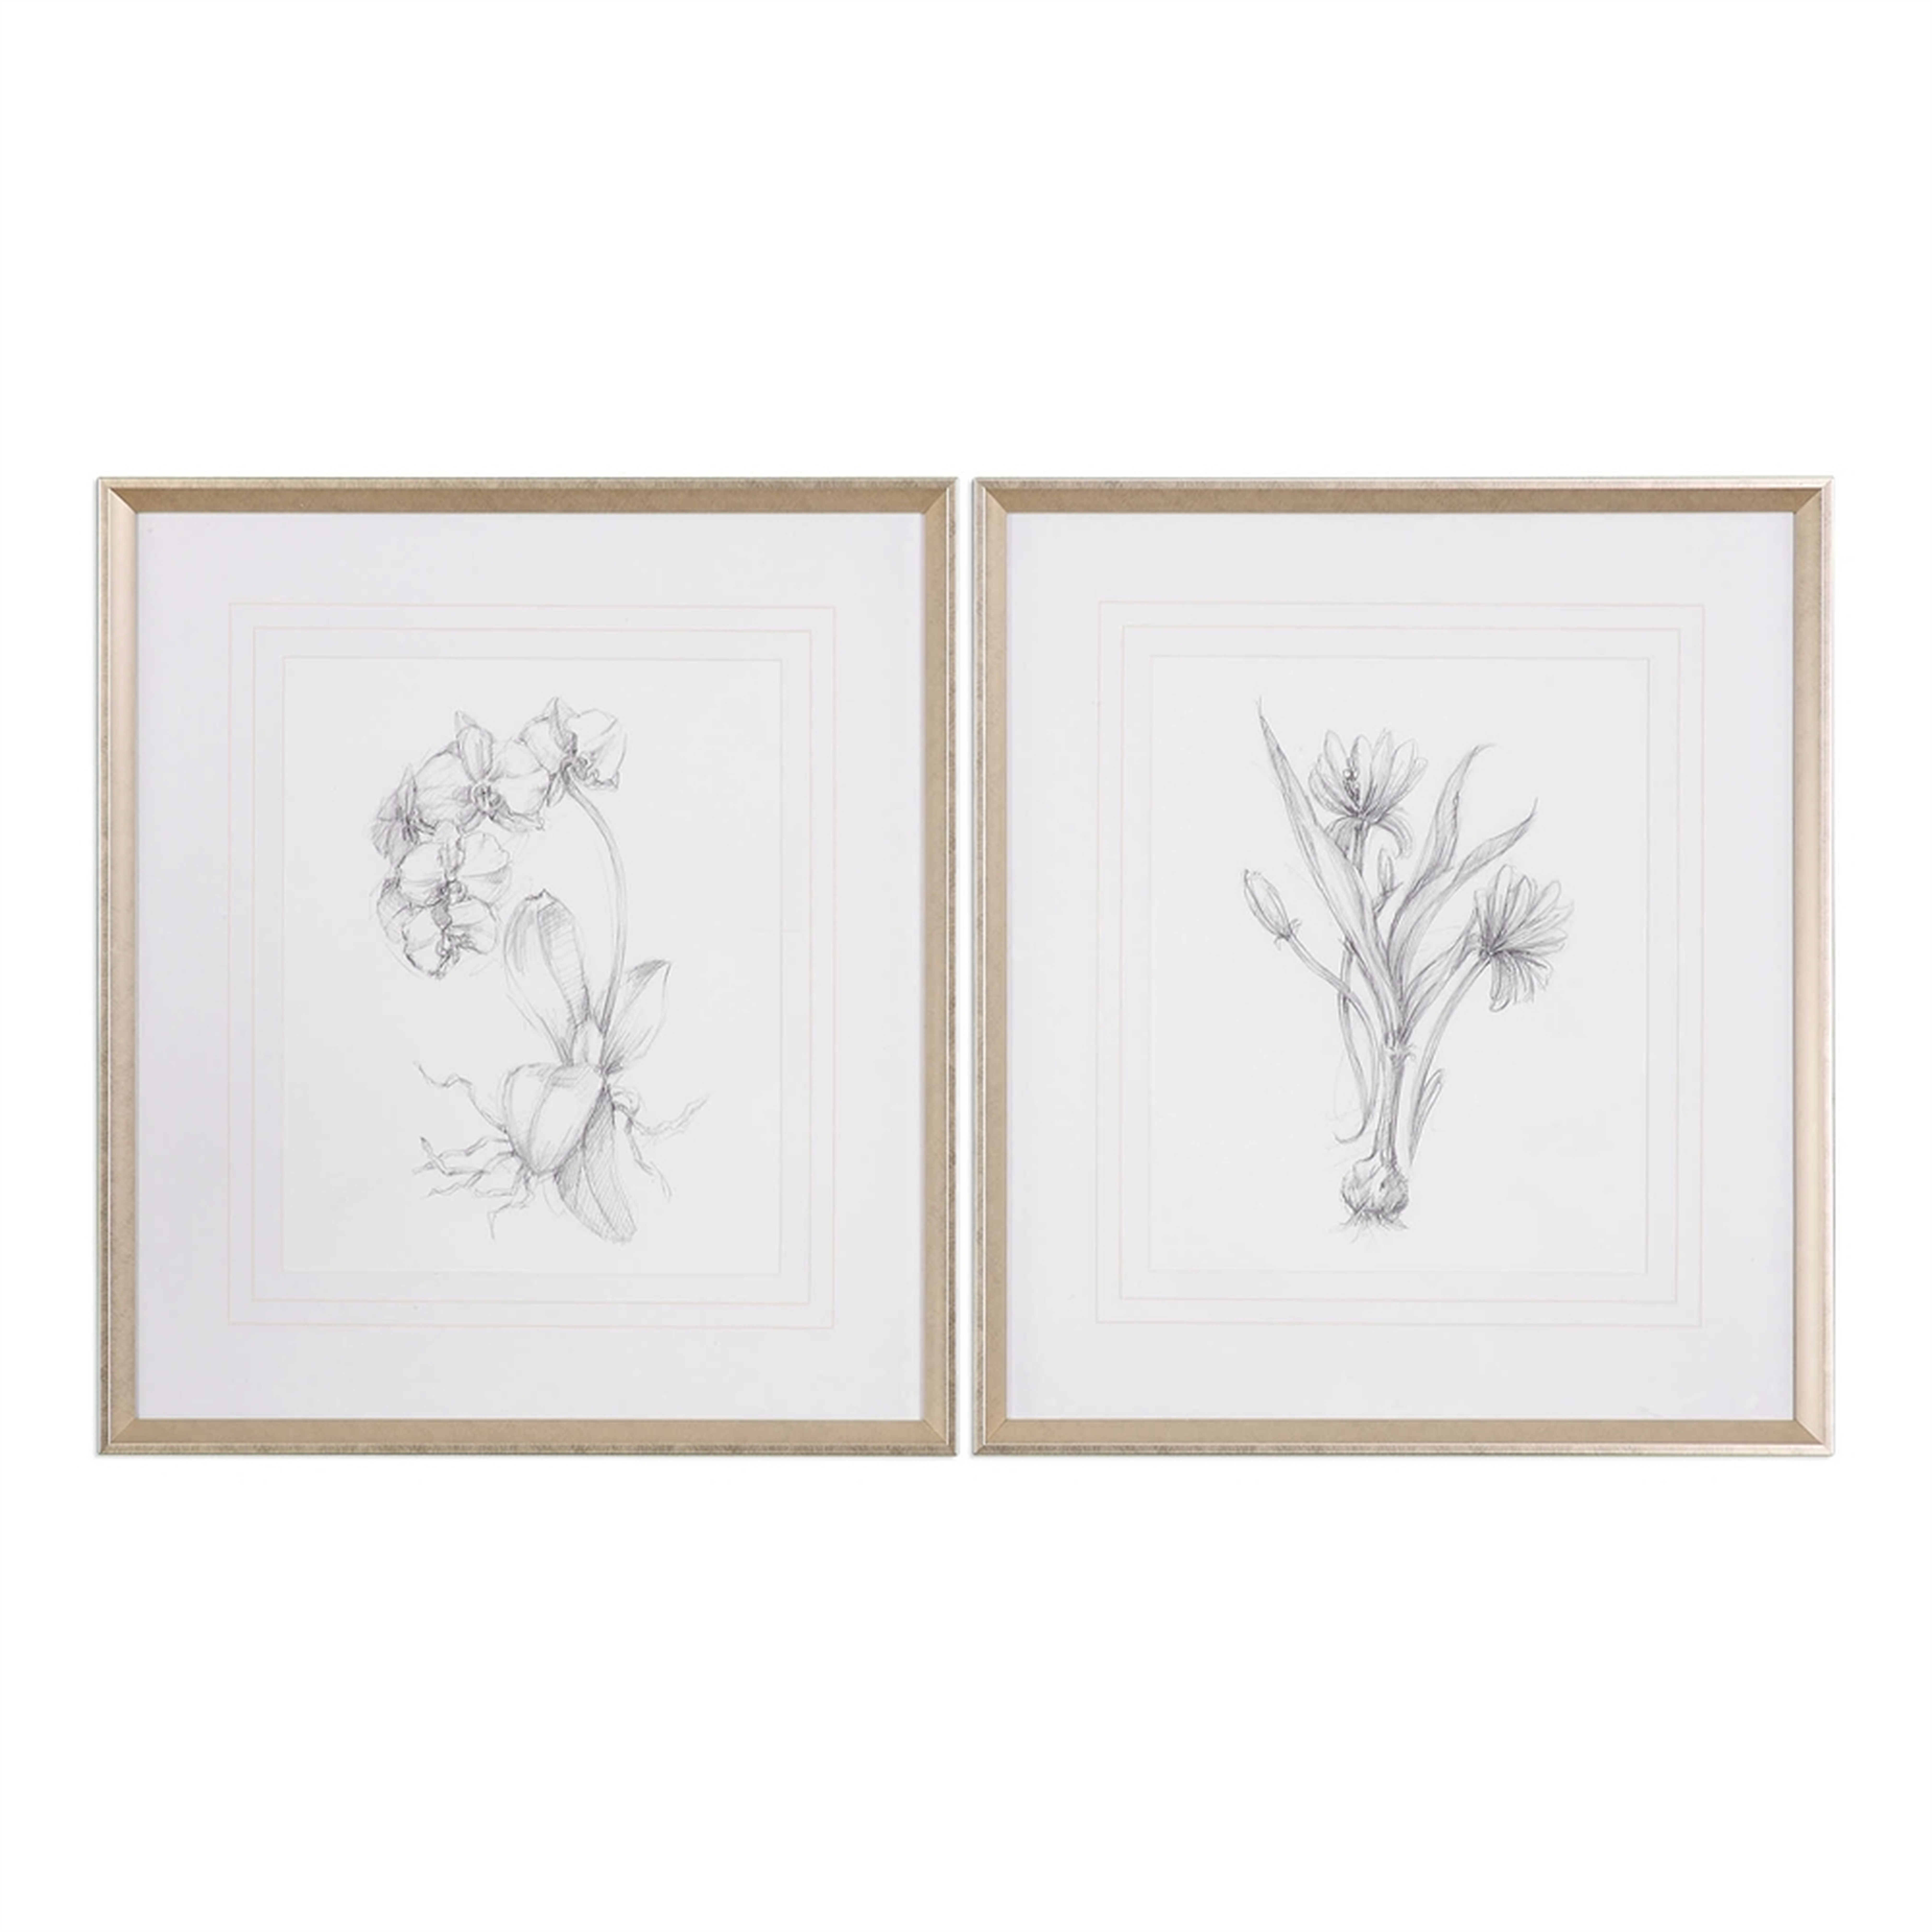 Botanical Sketches, Silver & Taupe Frame with Mat, 28" x 32", Set of 2 - Hudsonhill Foundry